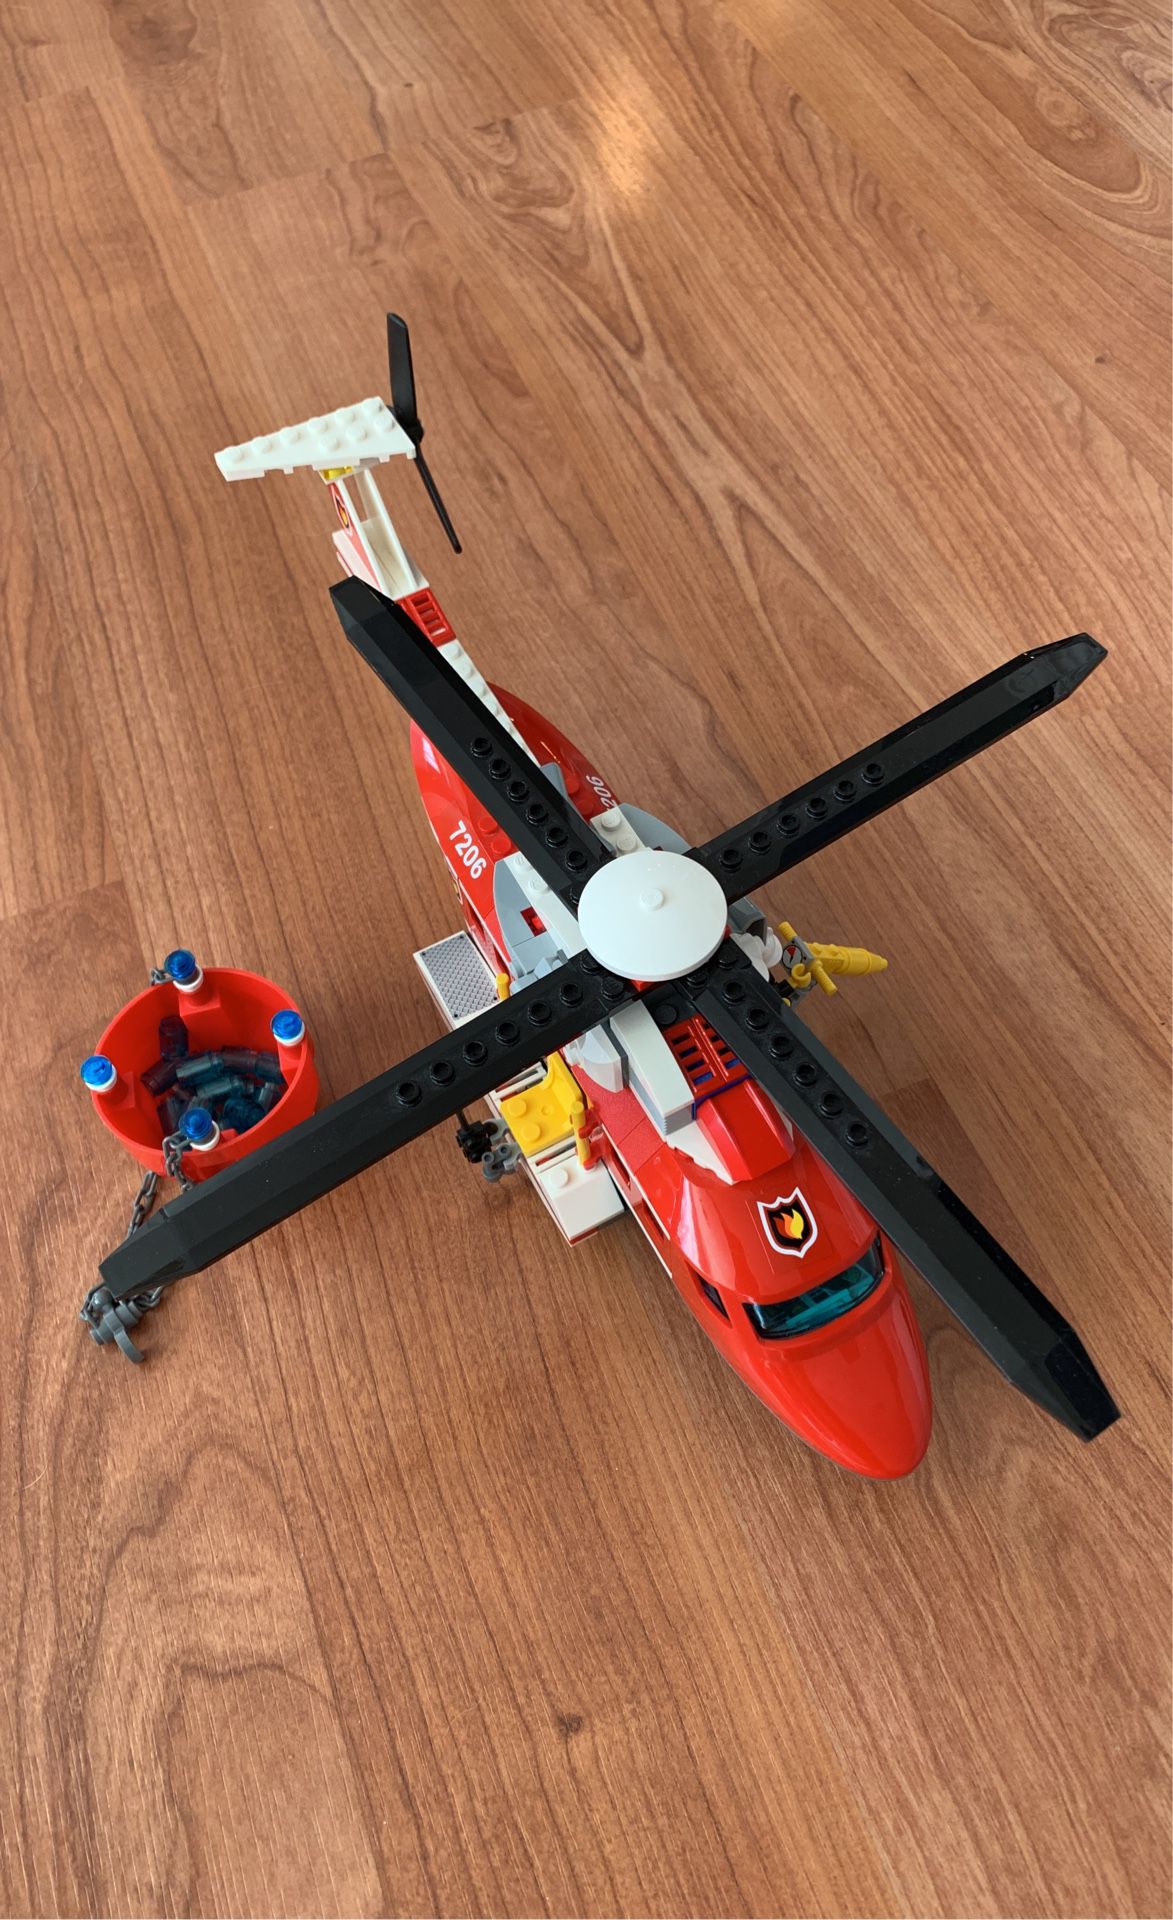 Lego City 7206 Fire Helicopter for Sale in Fishers, OfferUp